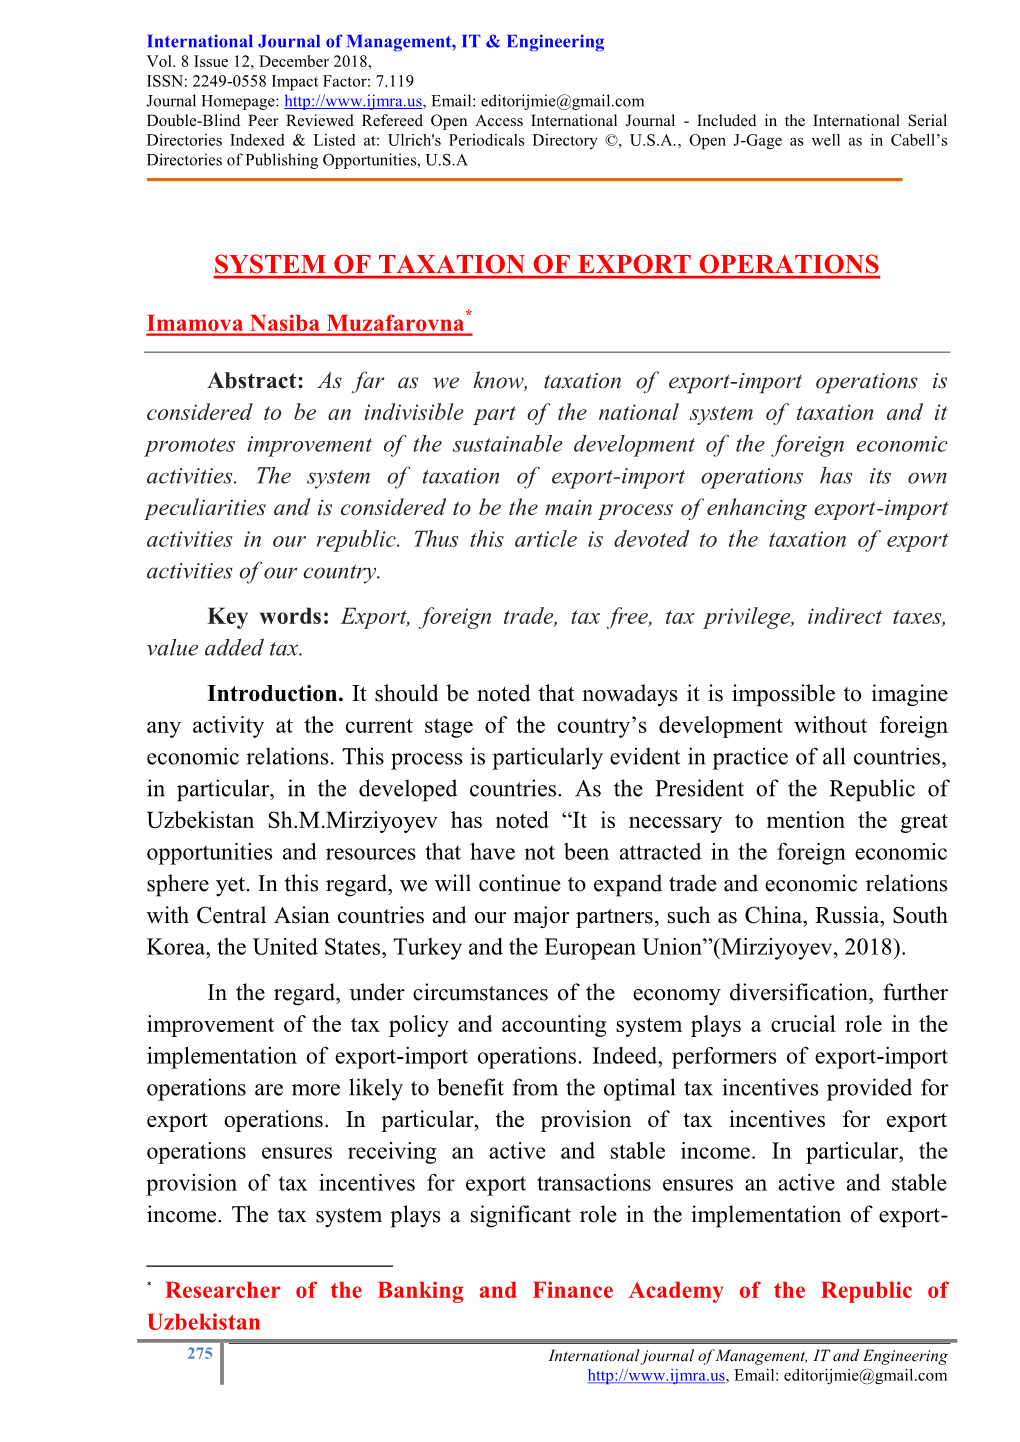 System of Taxation of Export Operations